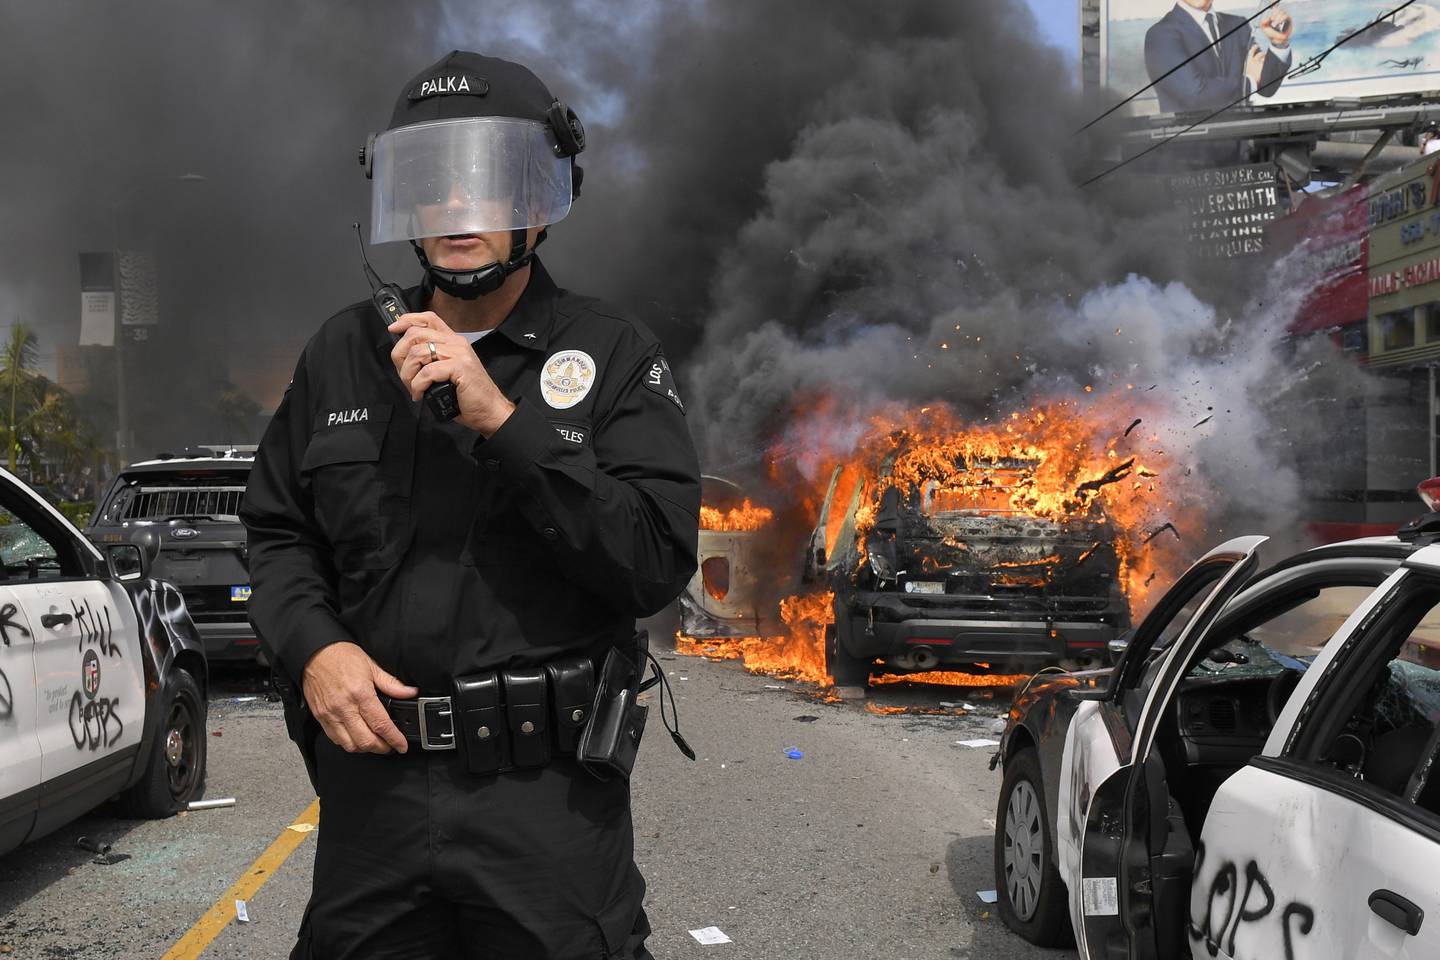 Los Angeles Police Department commander Cory Palka stands among several destroyed police cars as one explodes while on fire during a protest over the death of George Floyd, Saturday, May 30, 2020, in Los Angeles. Floyd died in police custody on Memorial Day in Minneapolis.